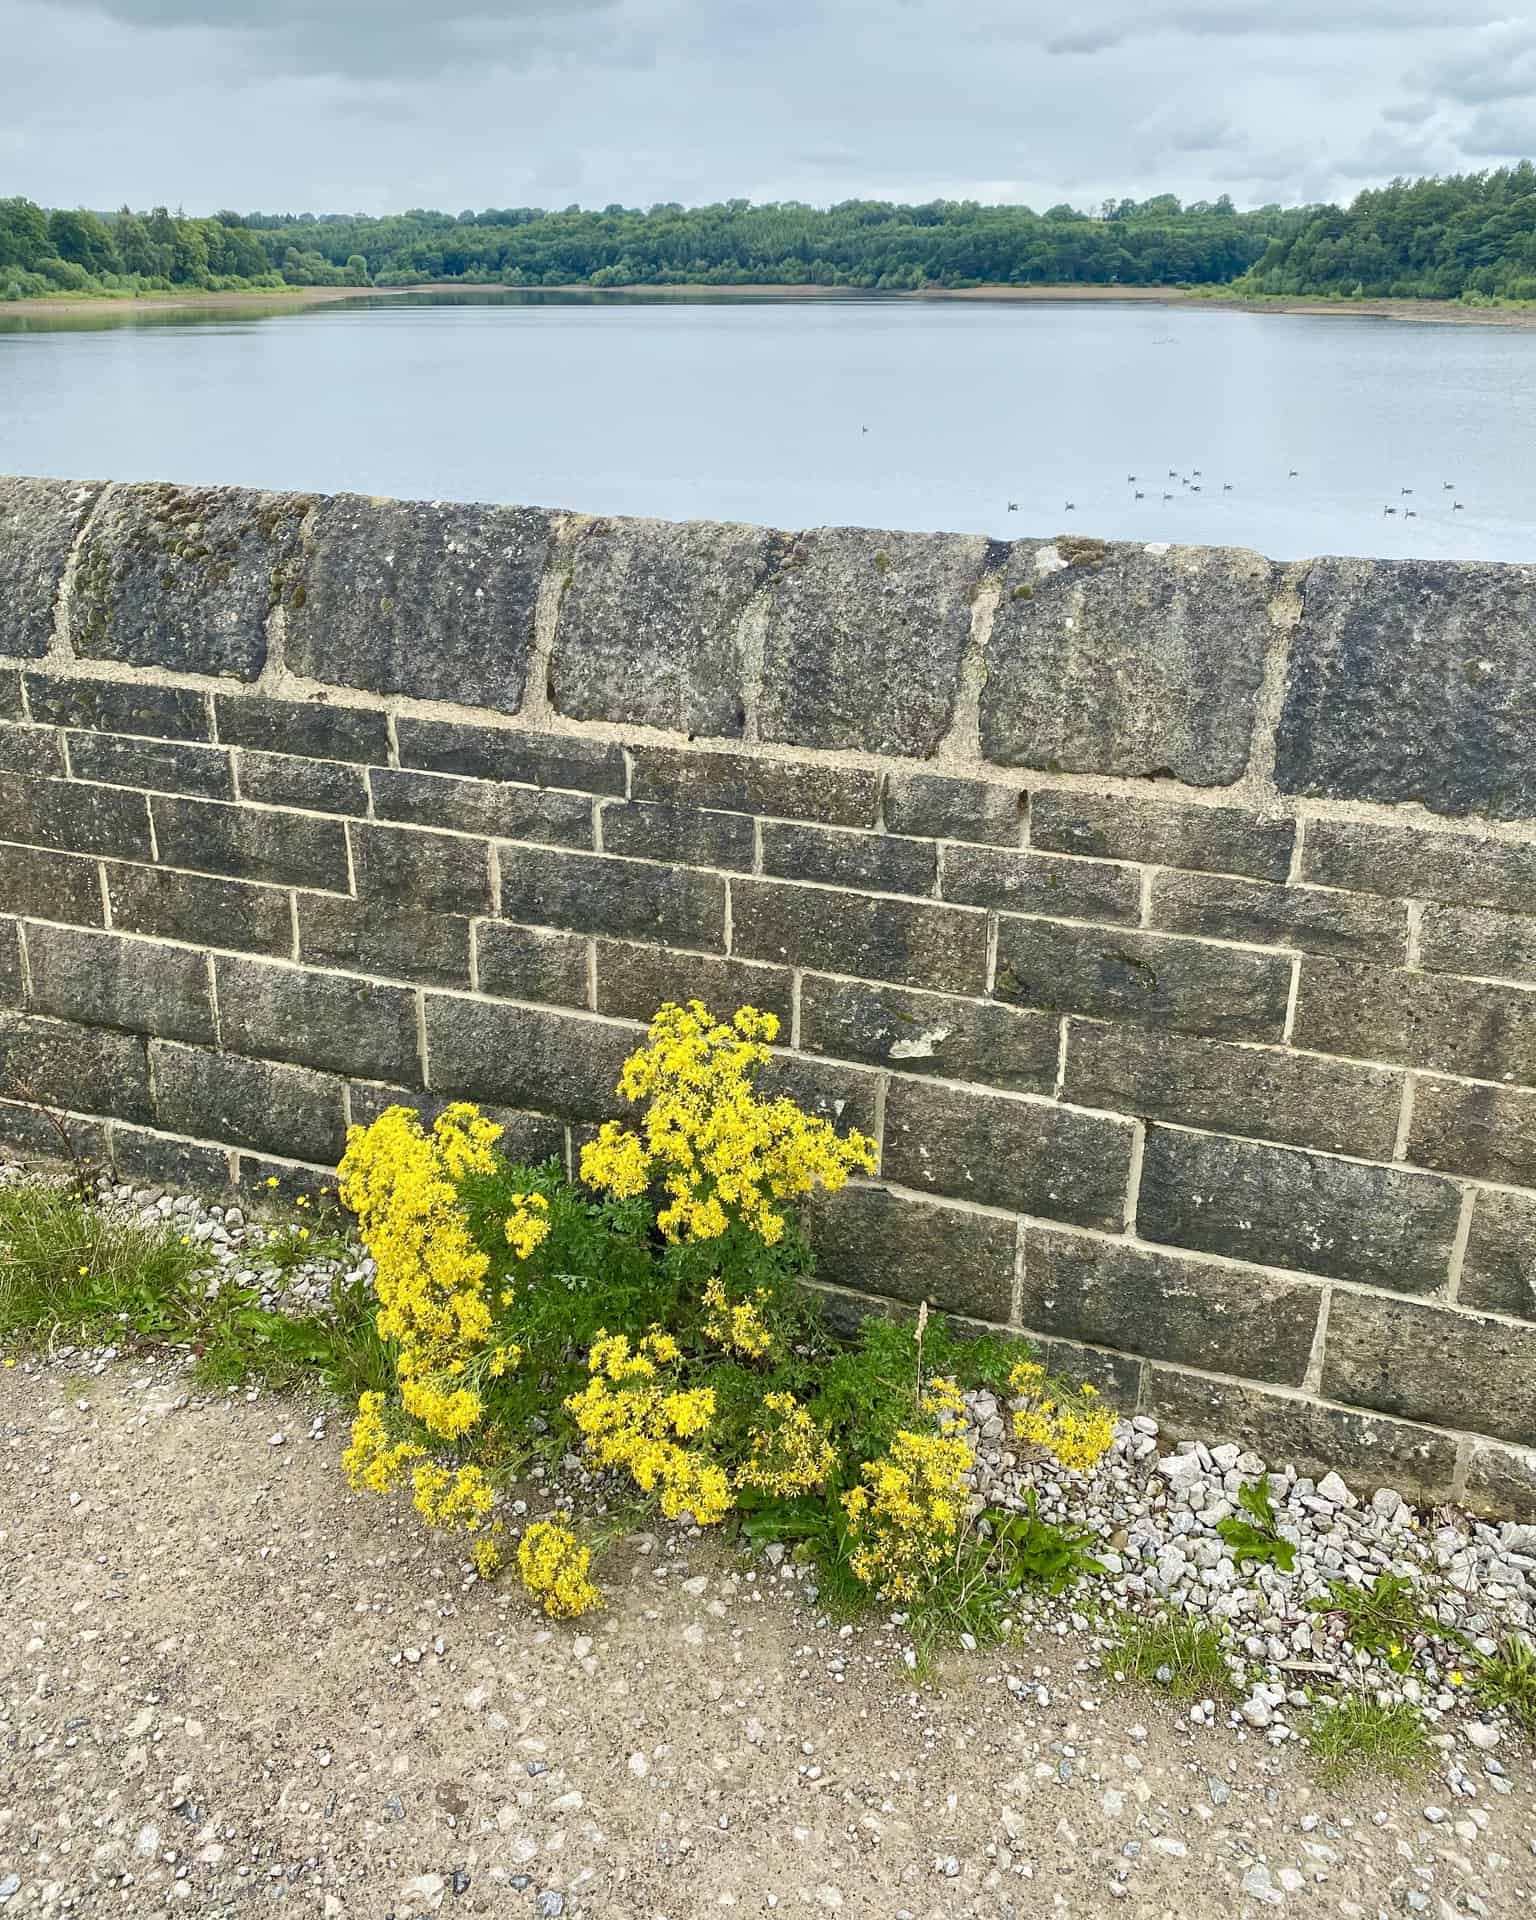 A view over Swinsty Embankment's wall, providing a northerly panorama of Swinsty Reservoir.